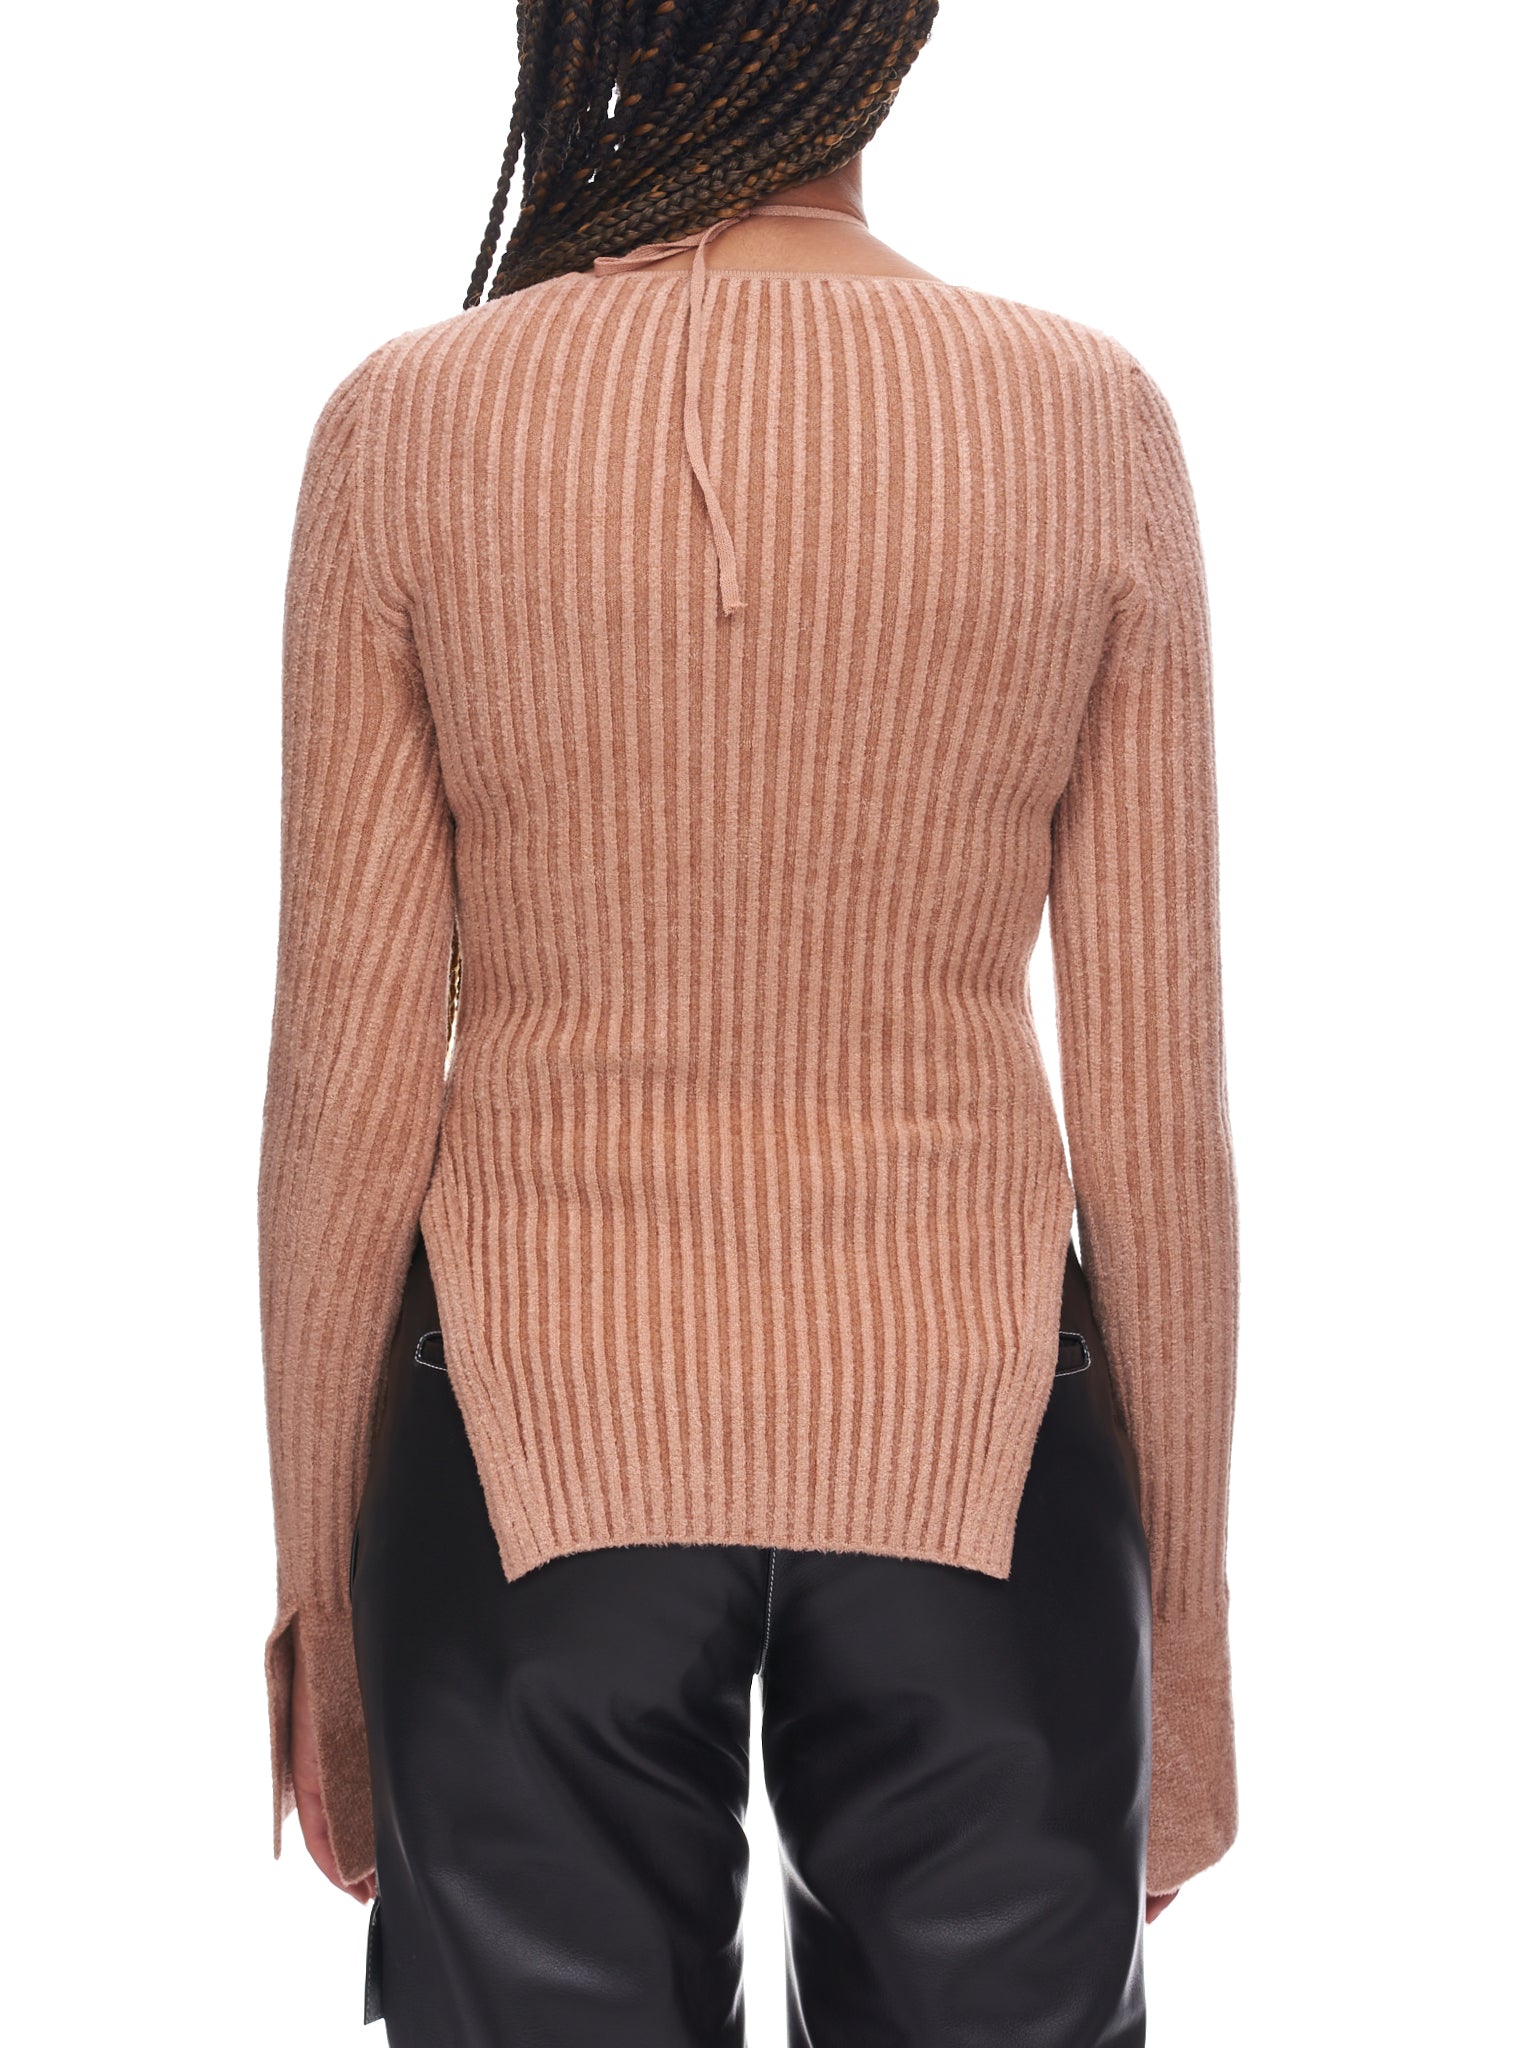 Knit Sweater (TO16774476-0476-002-NUDE)